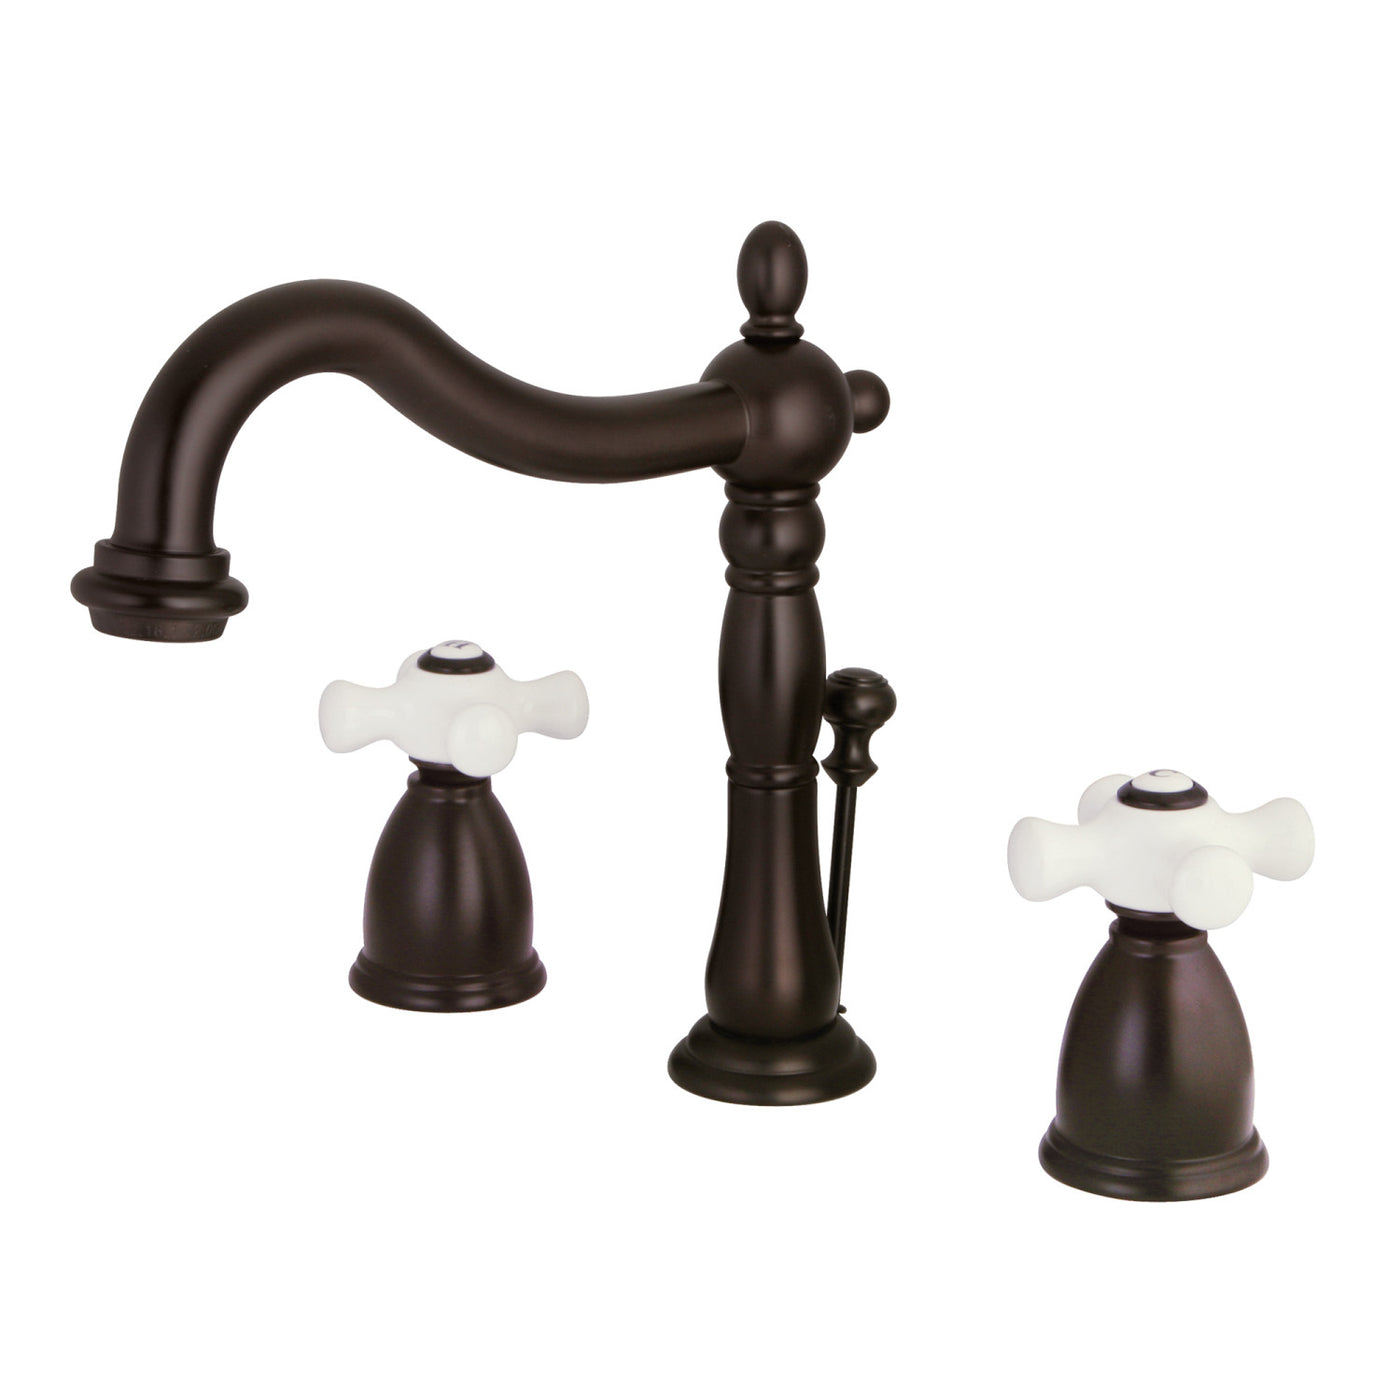 Elements of Design EB1975PX Widespread Bathroom Faucet with Plastic Pop-Up, Oil Rubbed Bronze